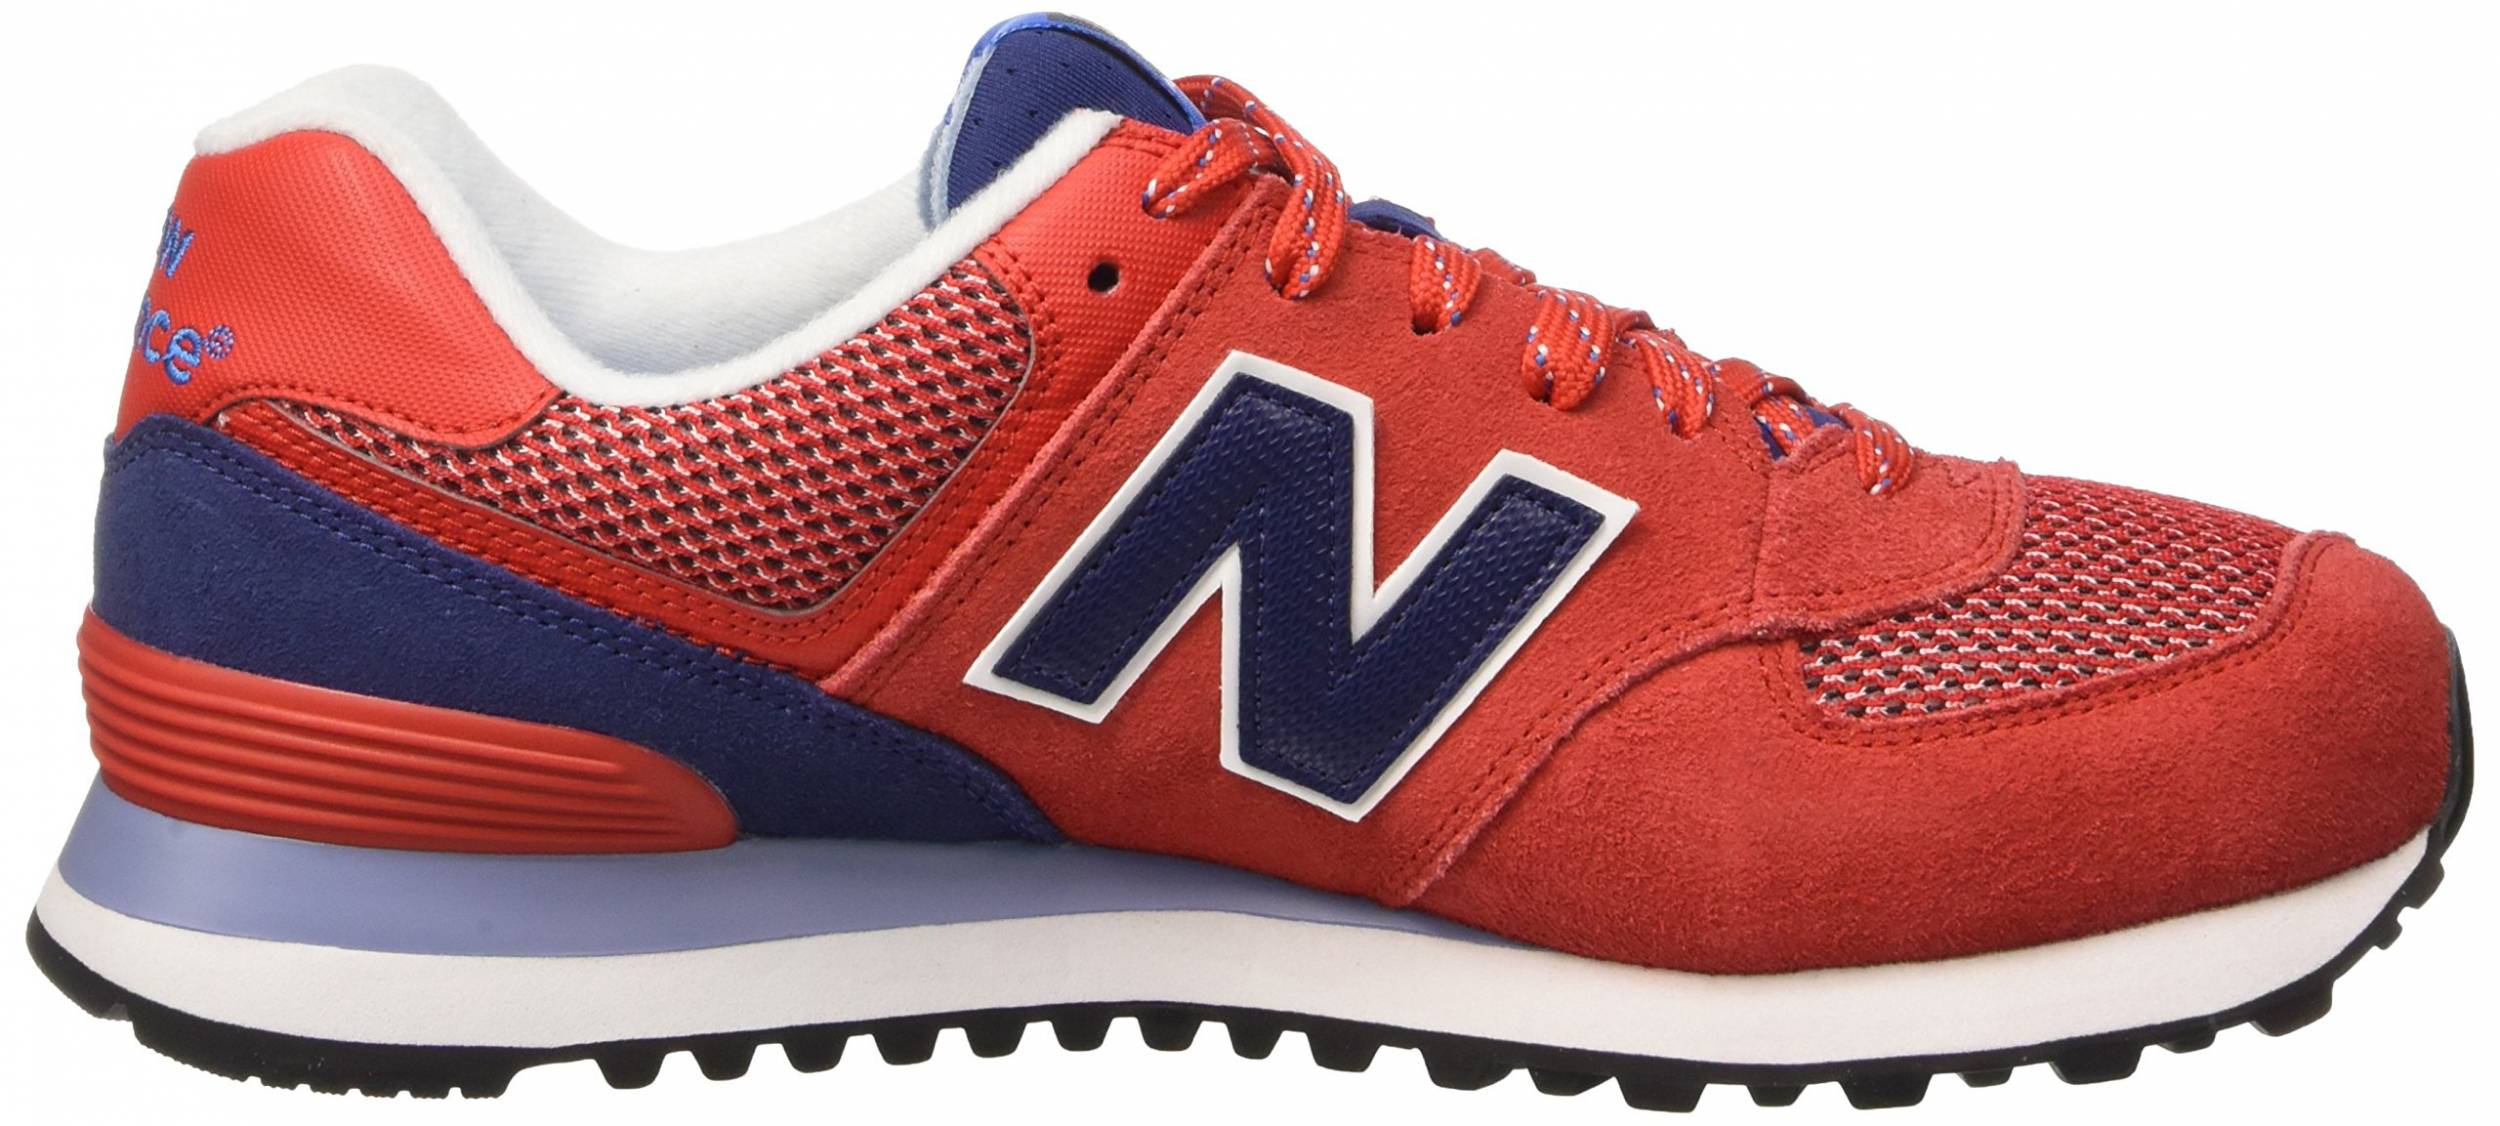 Only $39 + Review of New Balance 574 Fresh Foam | RunRepeat